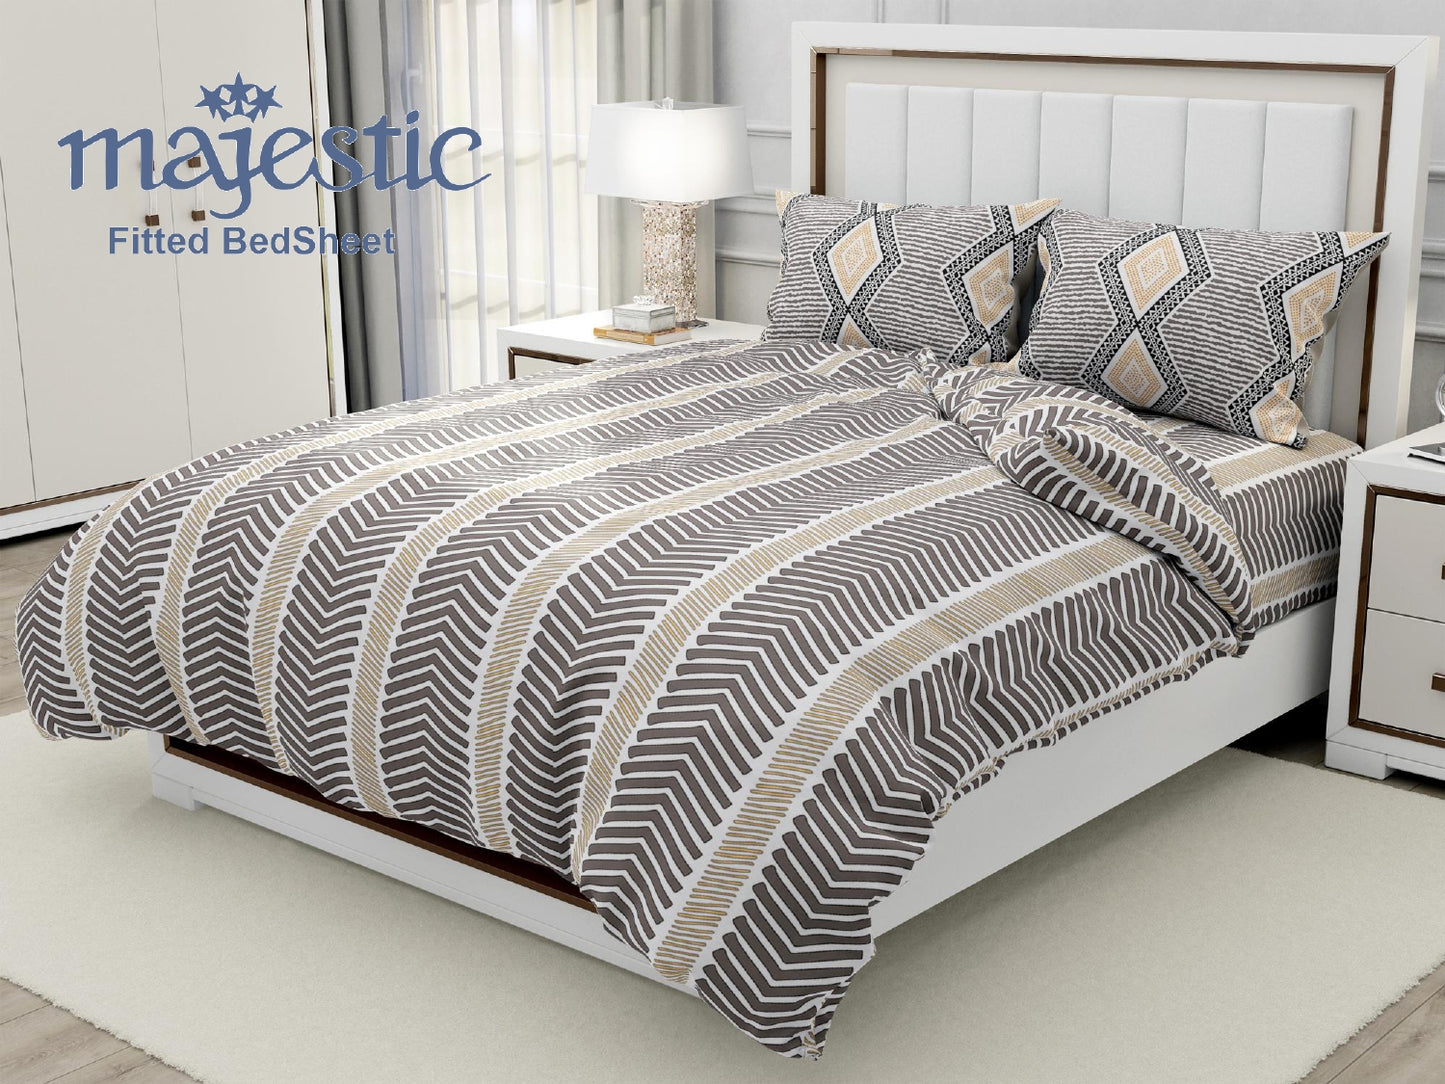 Signature King Fitted Bedsheet Collection-Majestic D 3